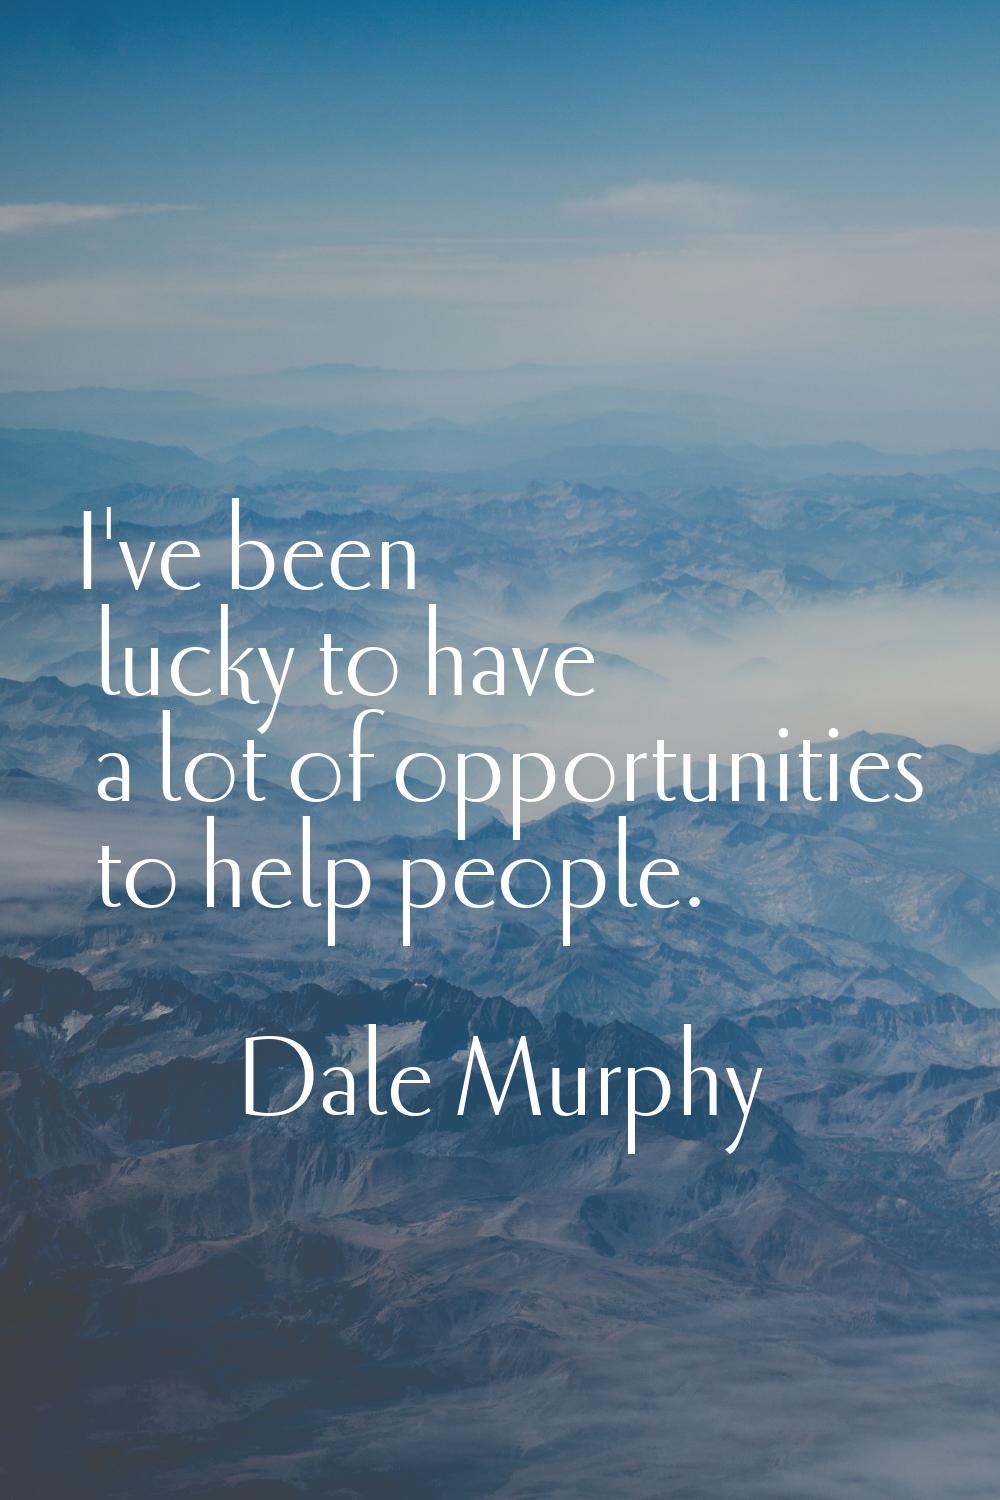 I've been lucky to have a lot of opportunities to help people.